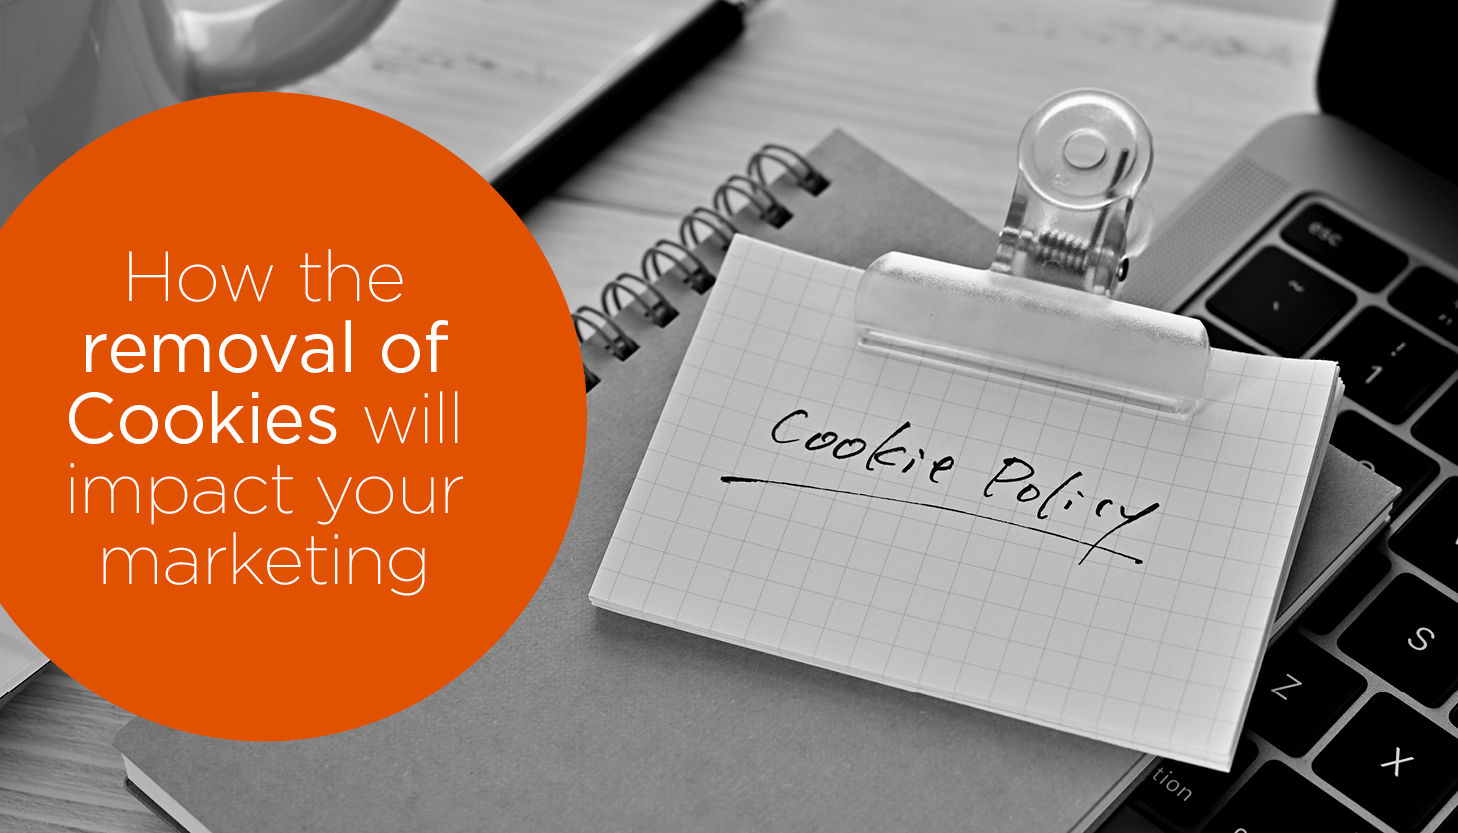 How the imminent removal of Cookies will impact your marketing